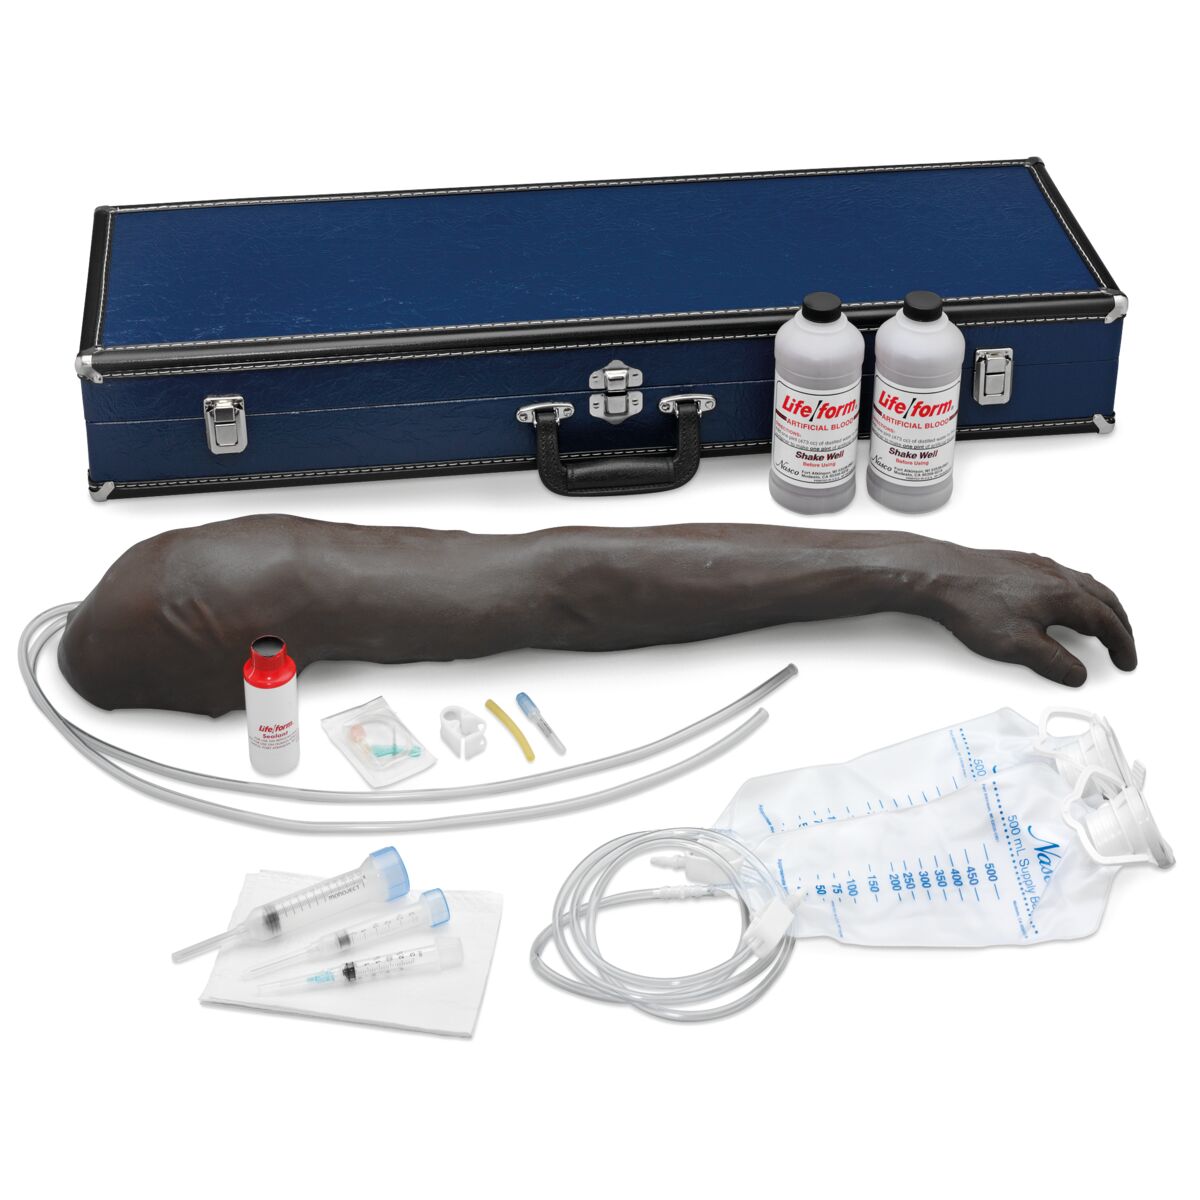 Life/form™ Advanced Venipuncture and Injection Arm - VATA